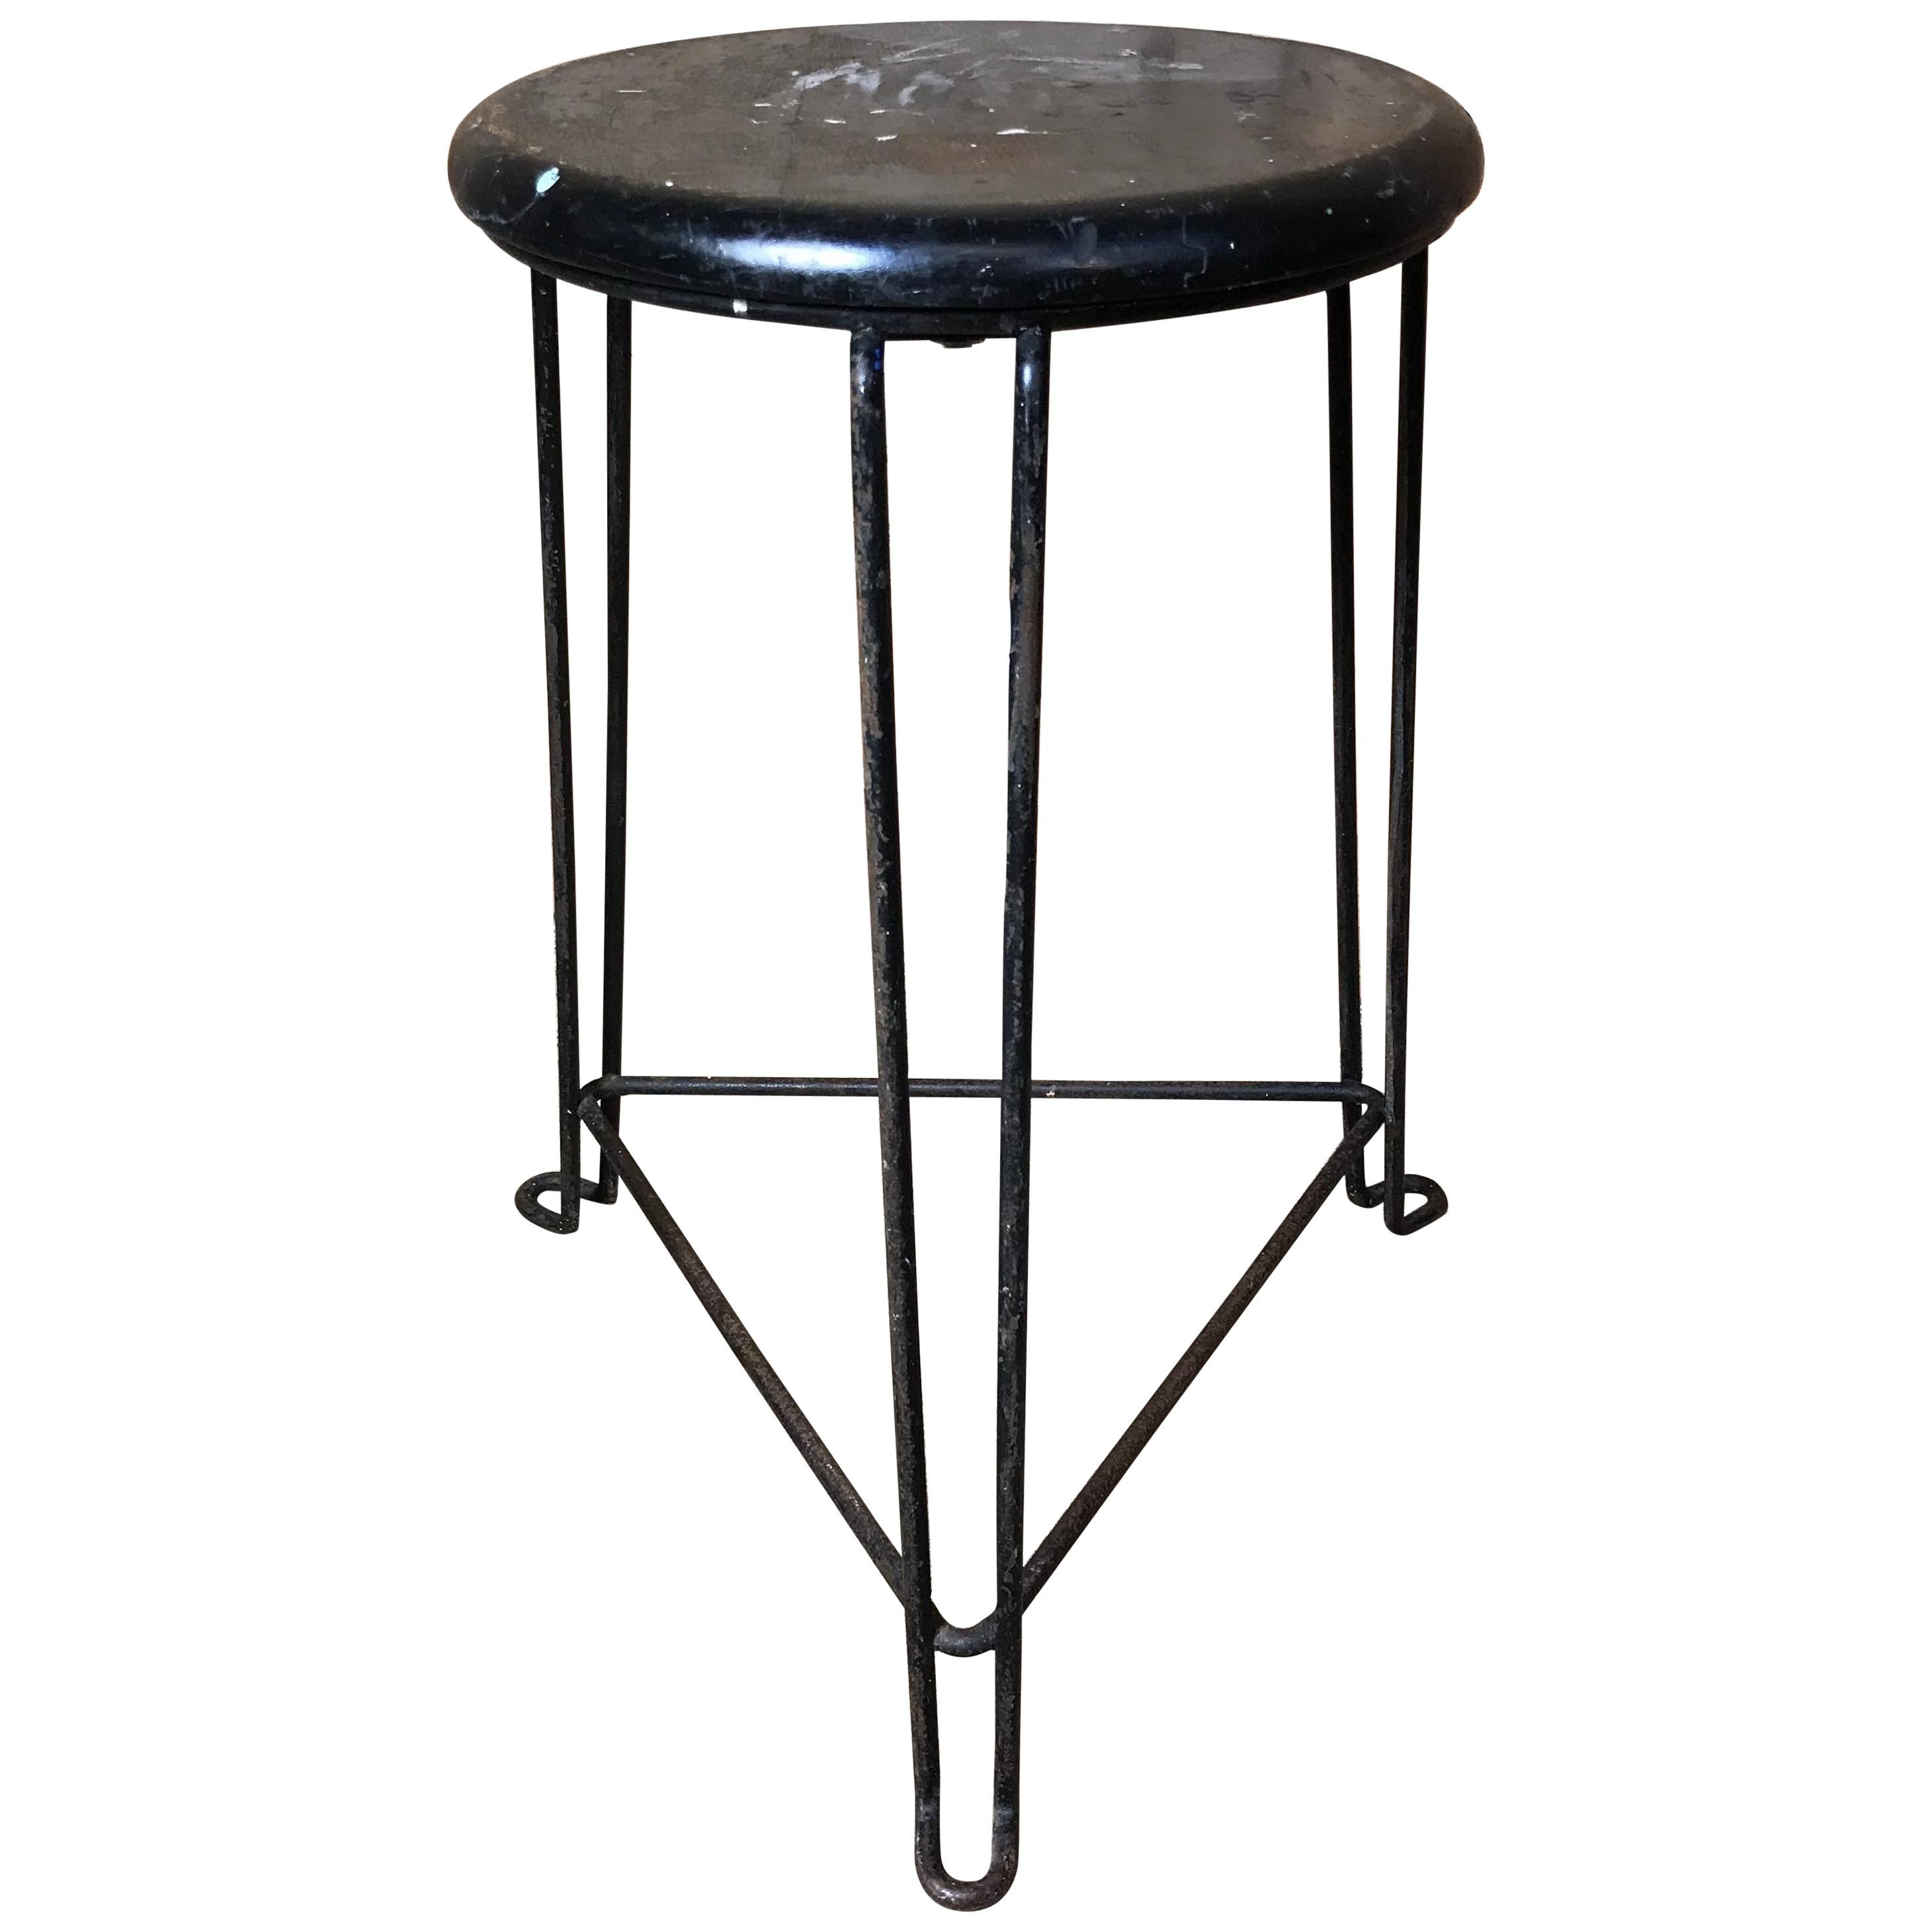 Retro 1960s Wooden Seat with Metal Frame Tomado Stool 'Black Seat' For Sale